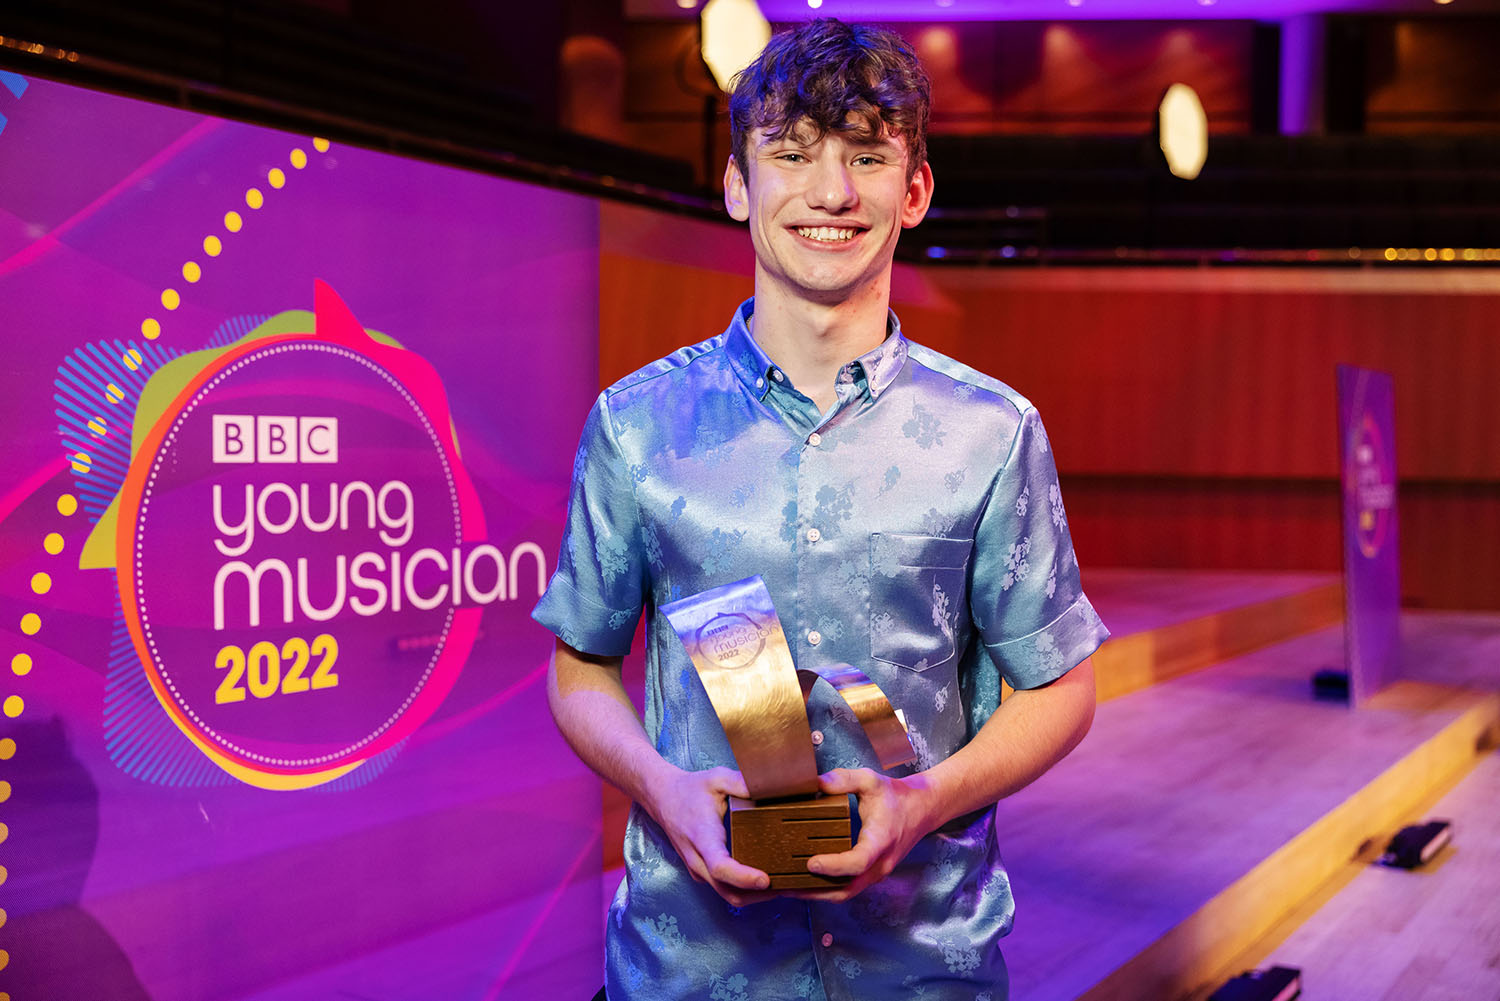 Music student celebrates ‘the versatility of percussion’ following BBC